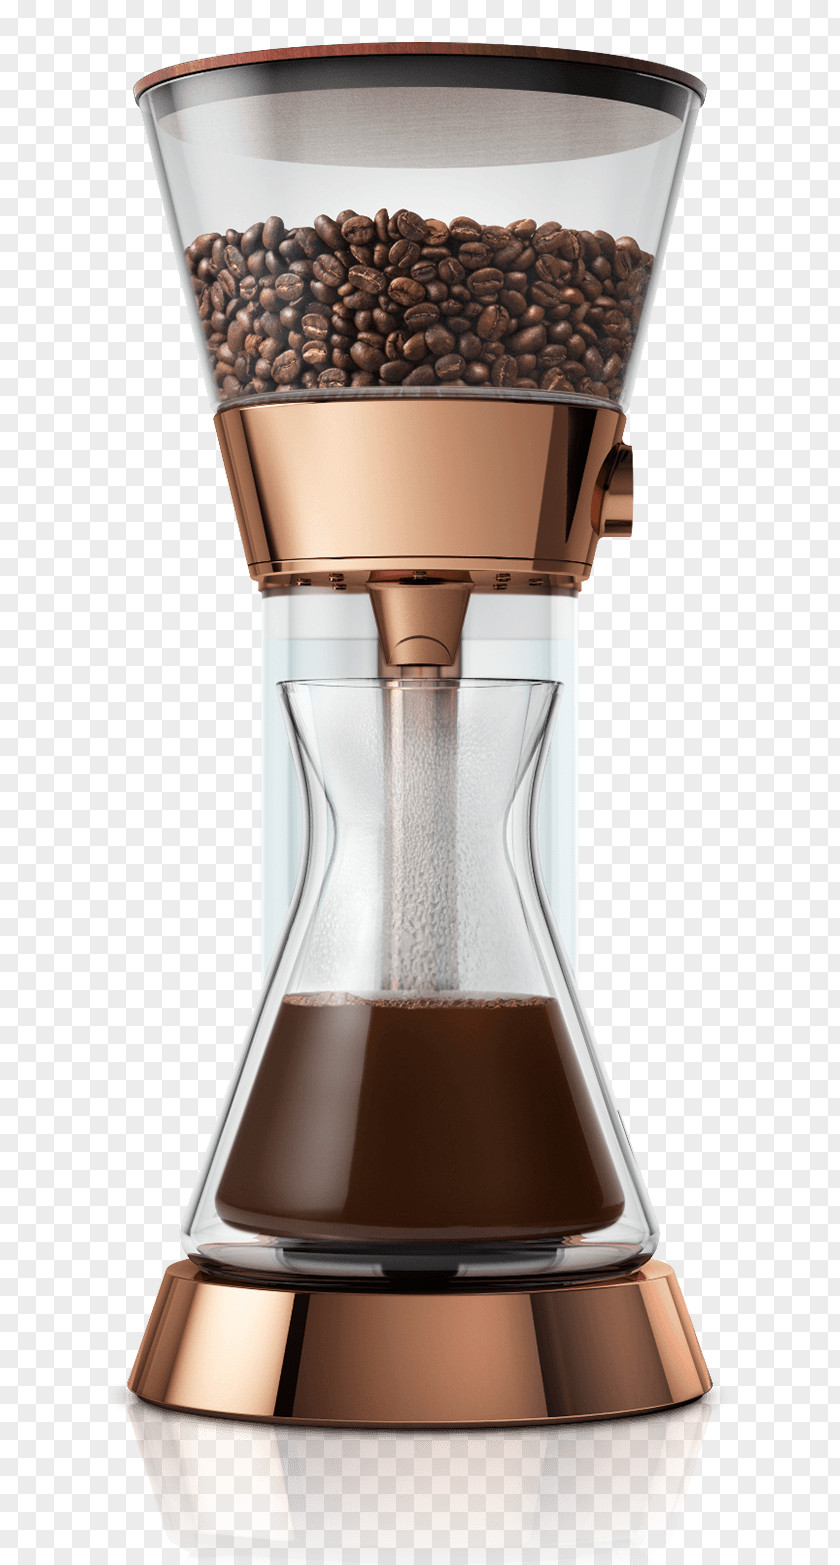 Make-over Coffeemaker Iced Coffee Roasting French Presses PNG